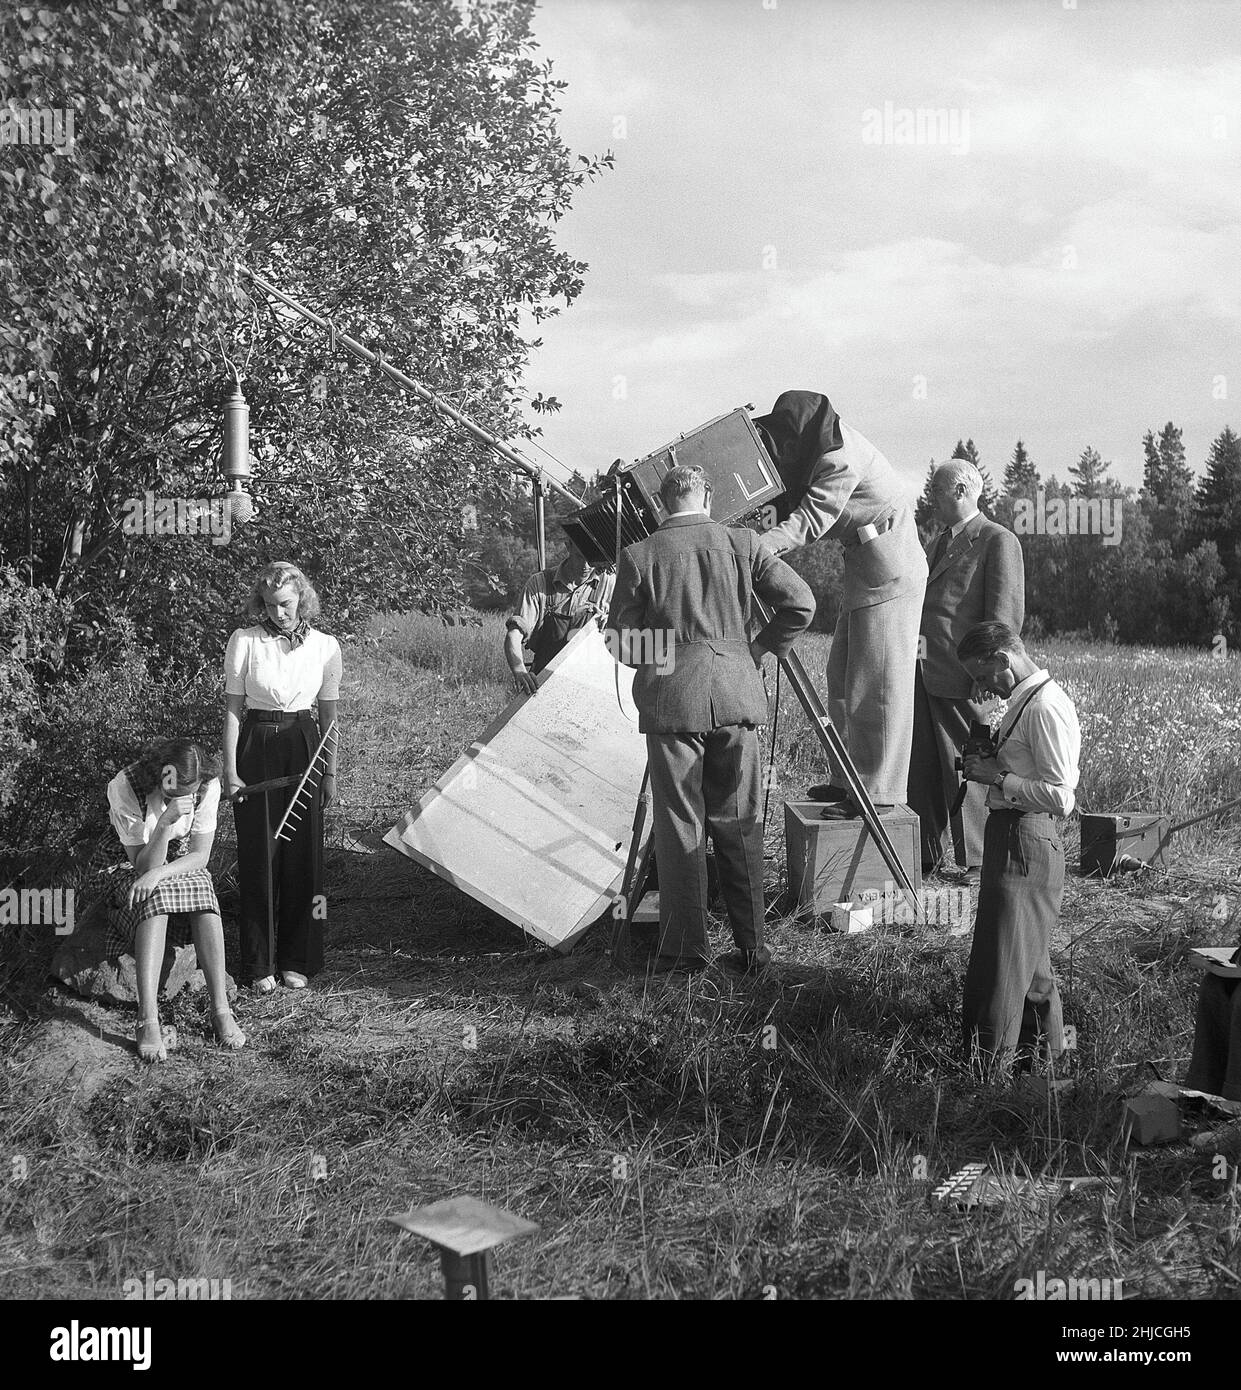 Filming in the 1940s. Filmcrew on set of the movie Ungt blod and actresses Brita Holmberg and Agneta Lagerfelt in an outdoor scene. To the right filmdirector Ivar Johansson. Filmphotographer has covered the part of the filmcamera where he sees the scene because of the intense sunlight his name is Karl-Erik Alberts. Place is Sturehov in the south of Stockholm. Sweden 1943 Kristoffersson ref E82-6 Stock Photo